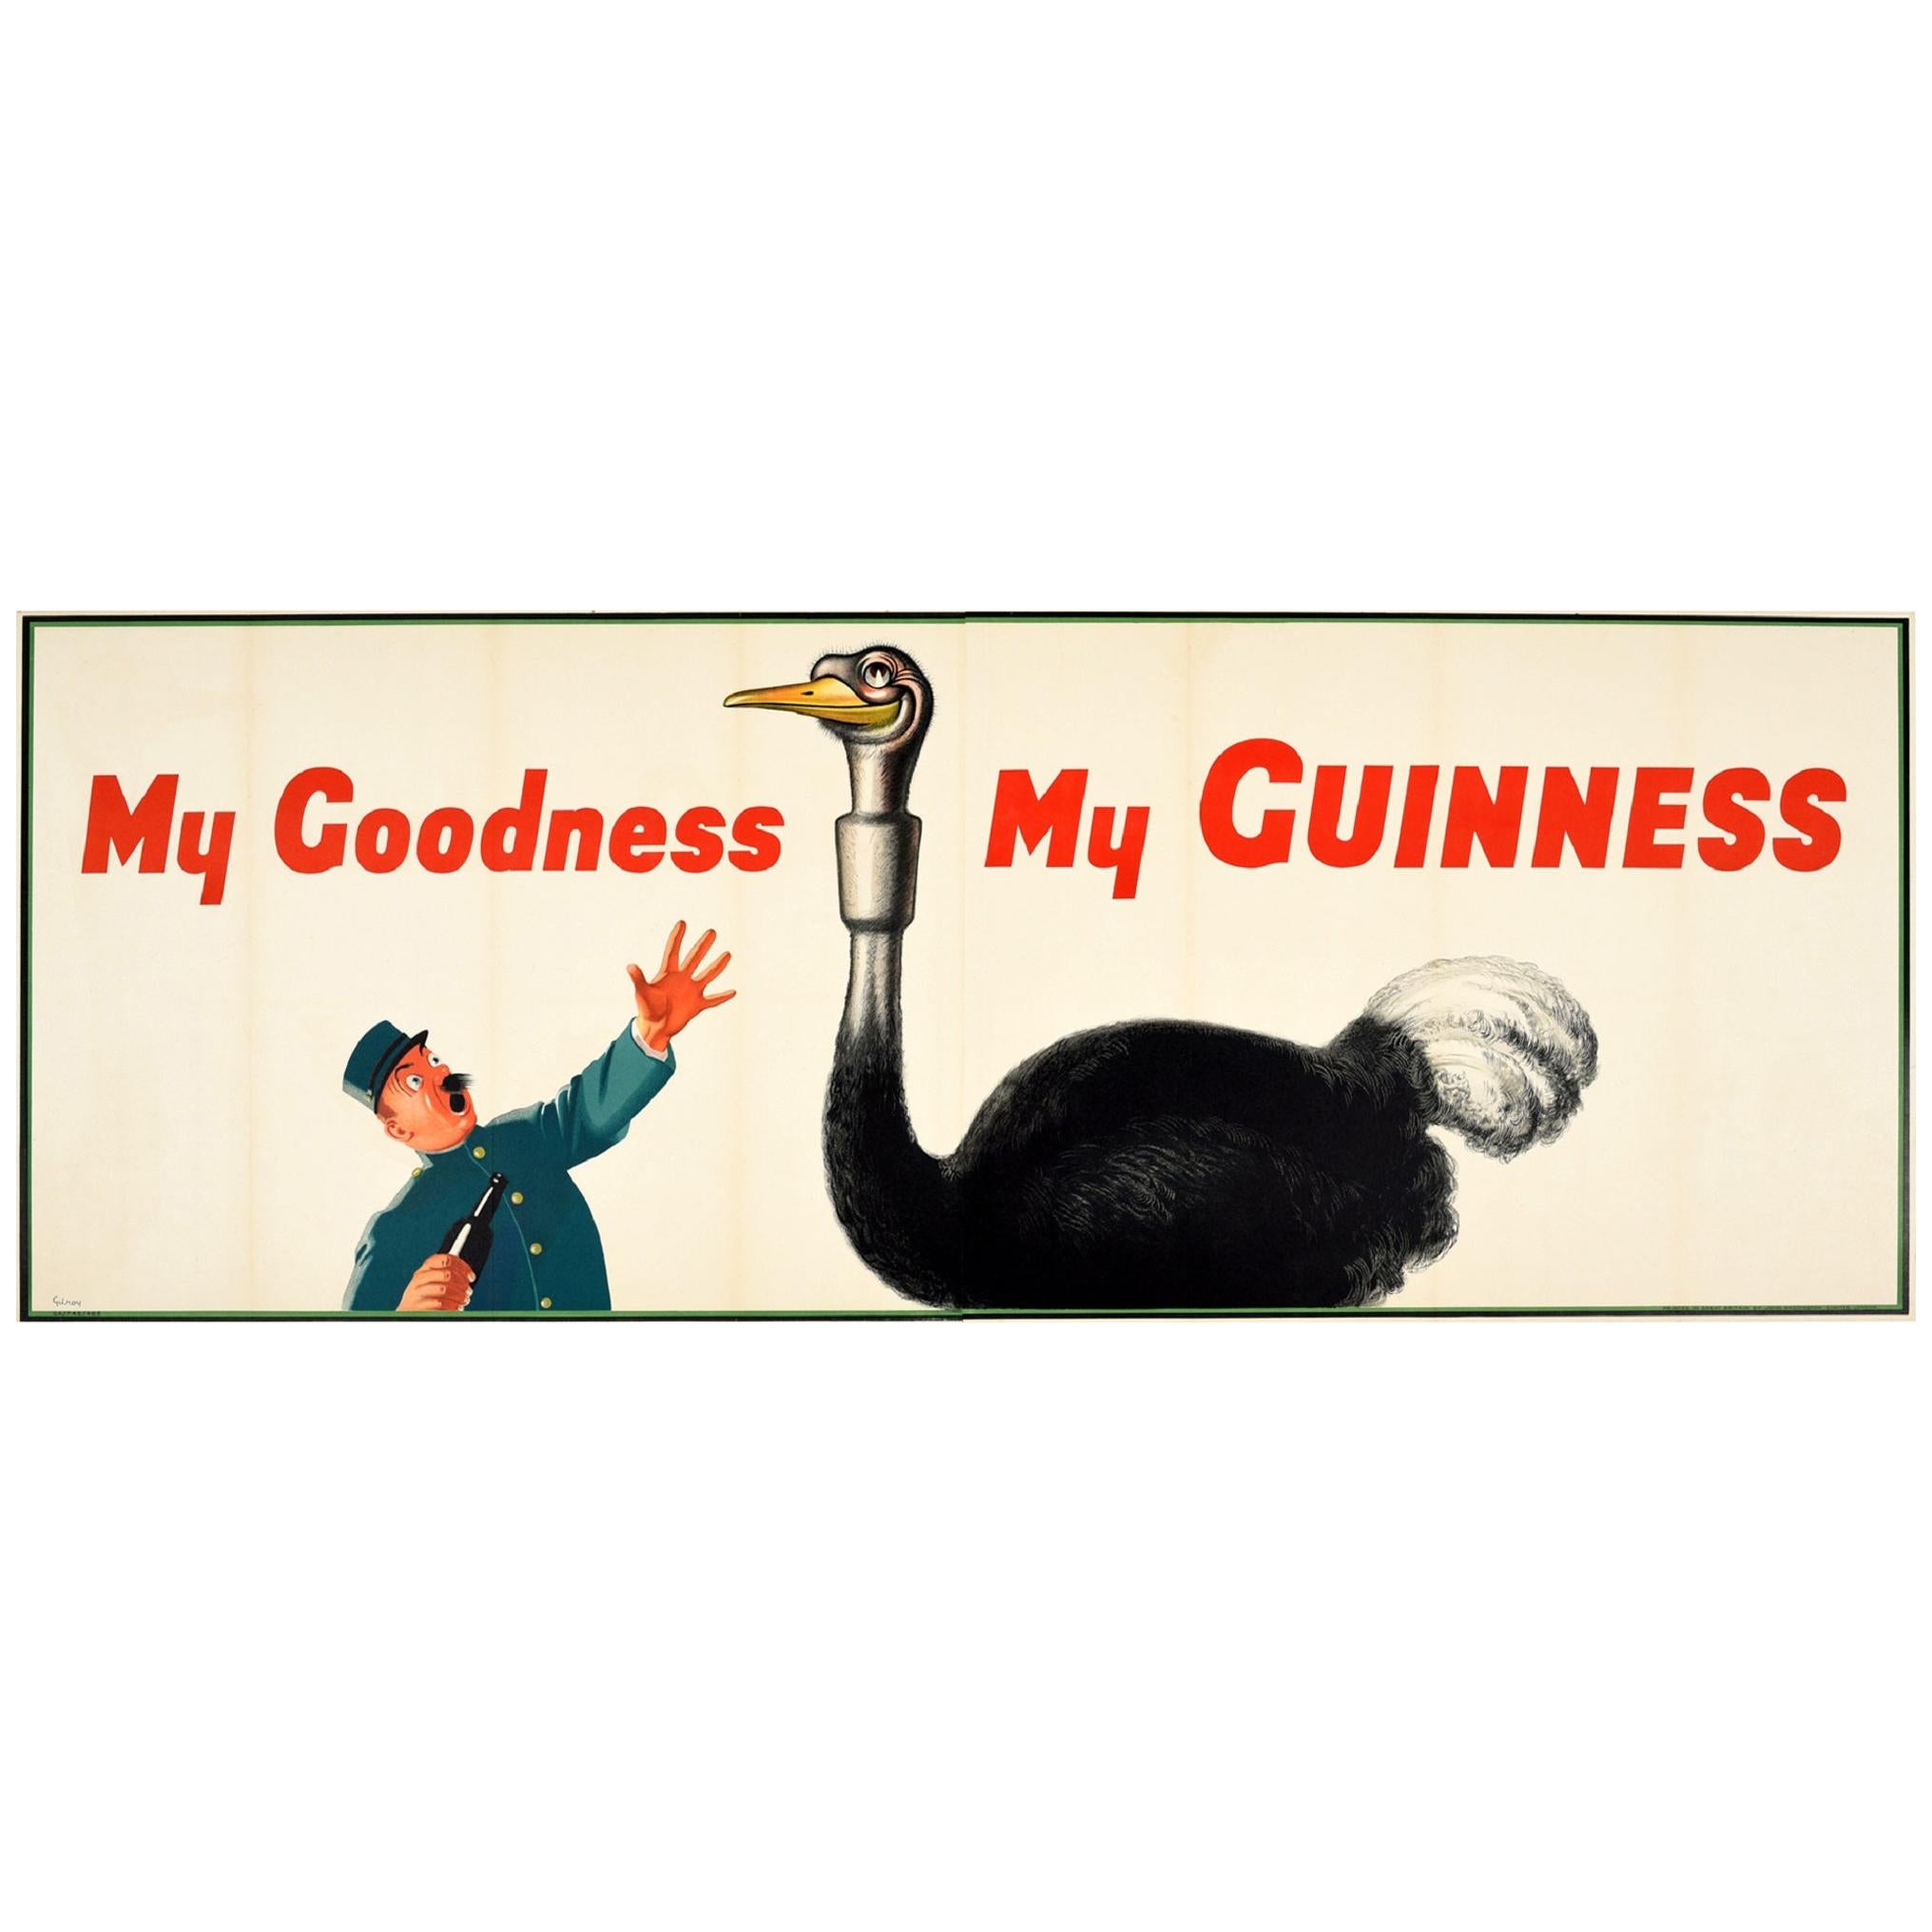 GUINNESS STOUT Vintage Beer Clear GLASS Ostrich 1990 MALAYSIA 5.5" My Goodness 